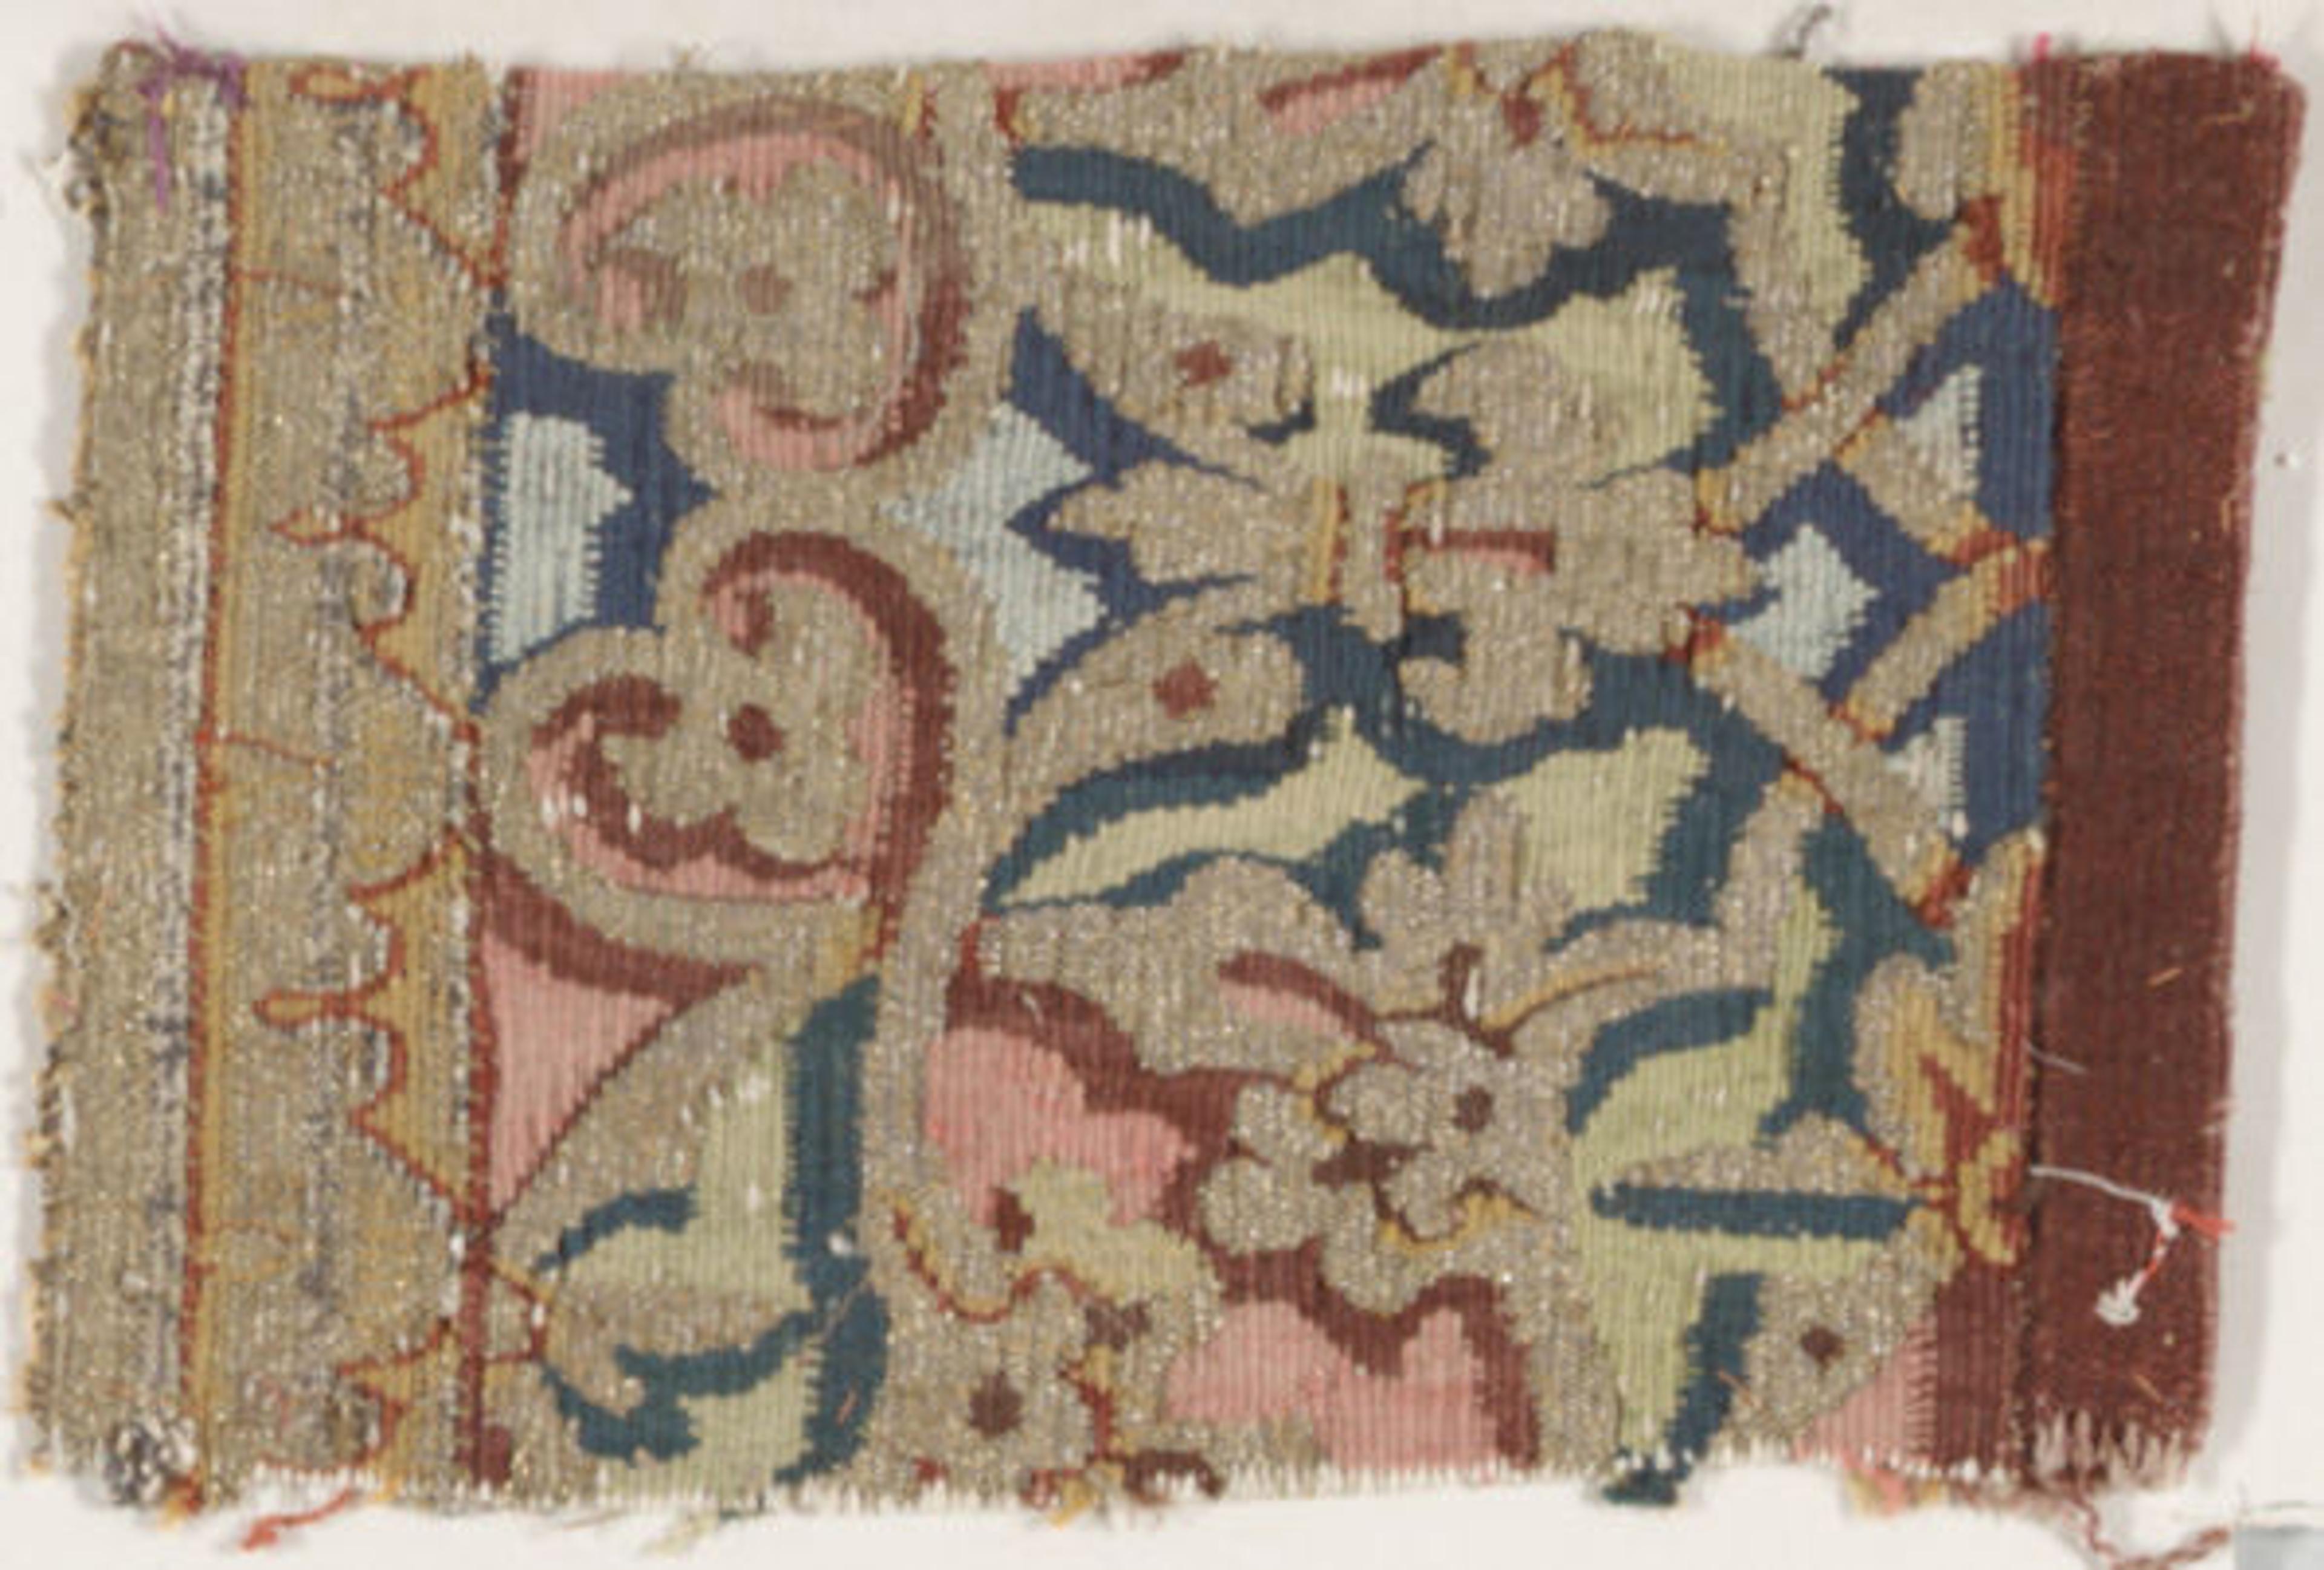 Tapestry fragment, 16th century.